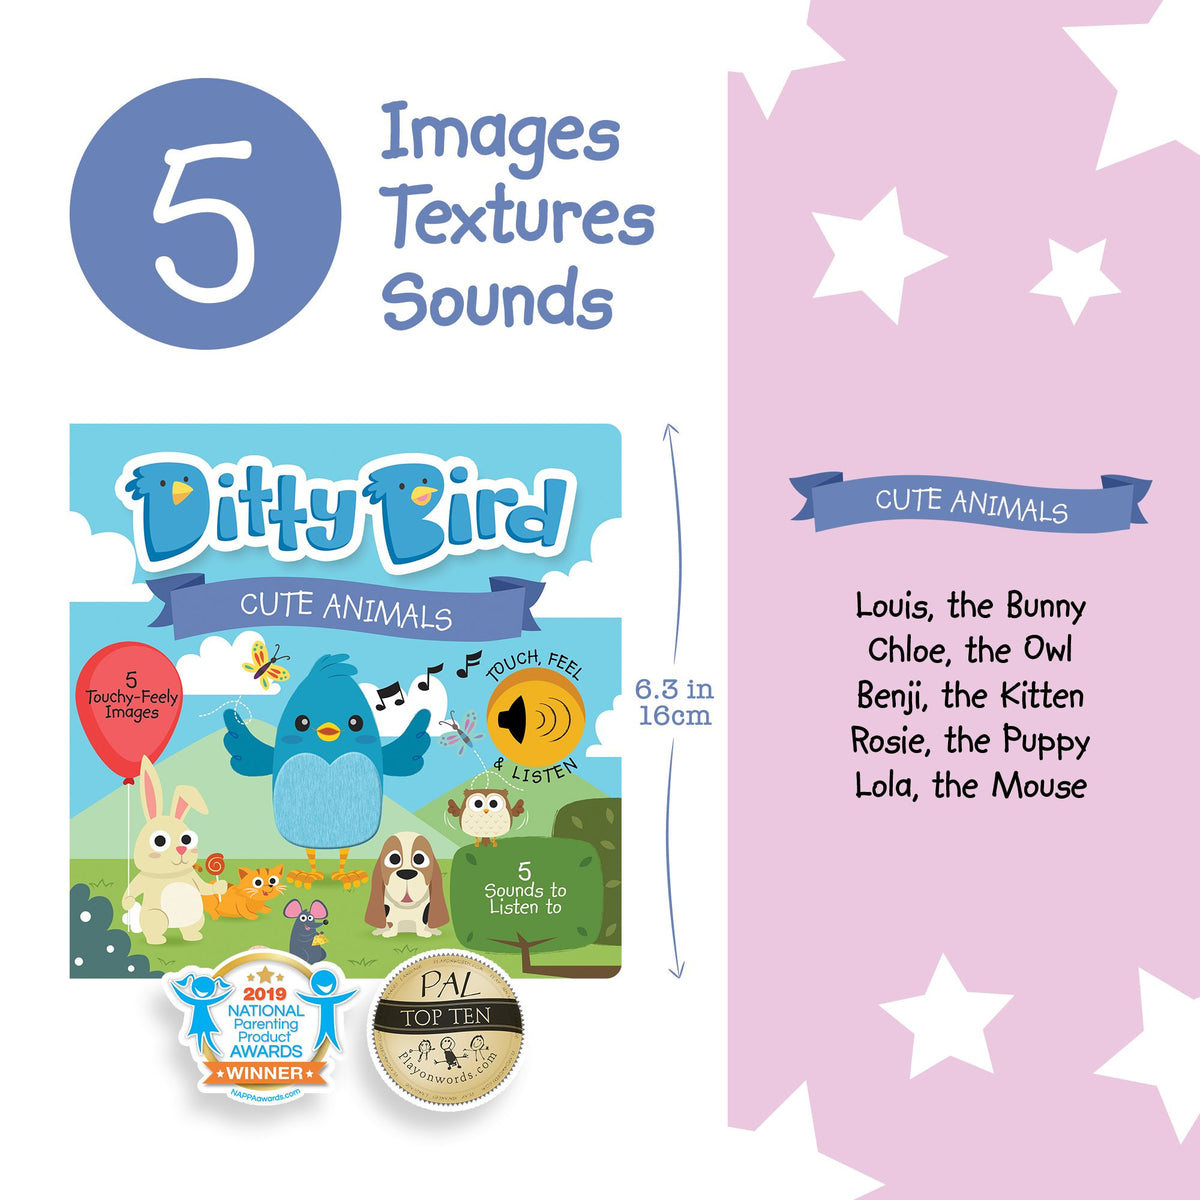 Ditty Bird Cute Animals TOUCH, FEEL & LISTEN Sounds Book [Authentic] - Audio Sound Book for Children Ages 1+ Ready Stocks [B1-3 OTHERS]